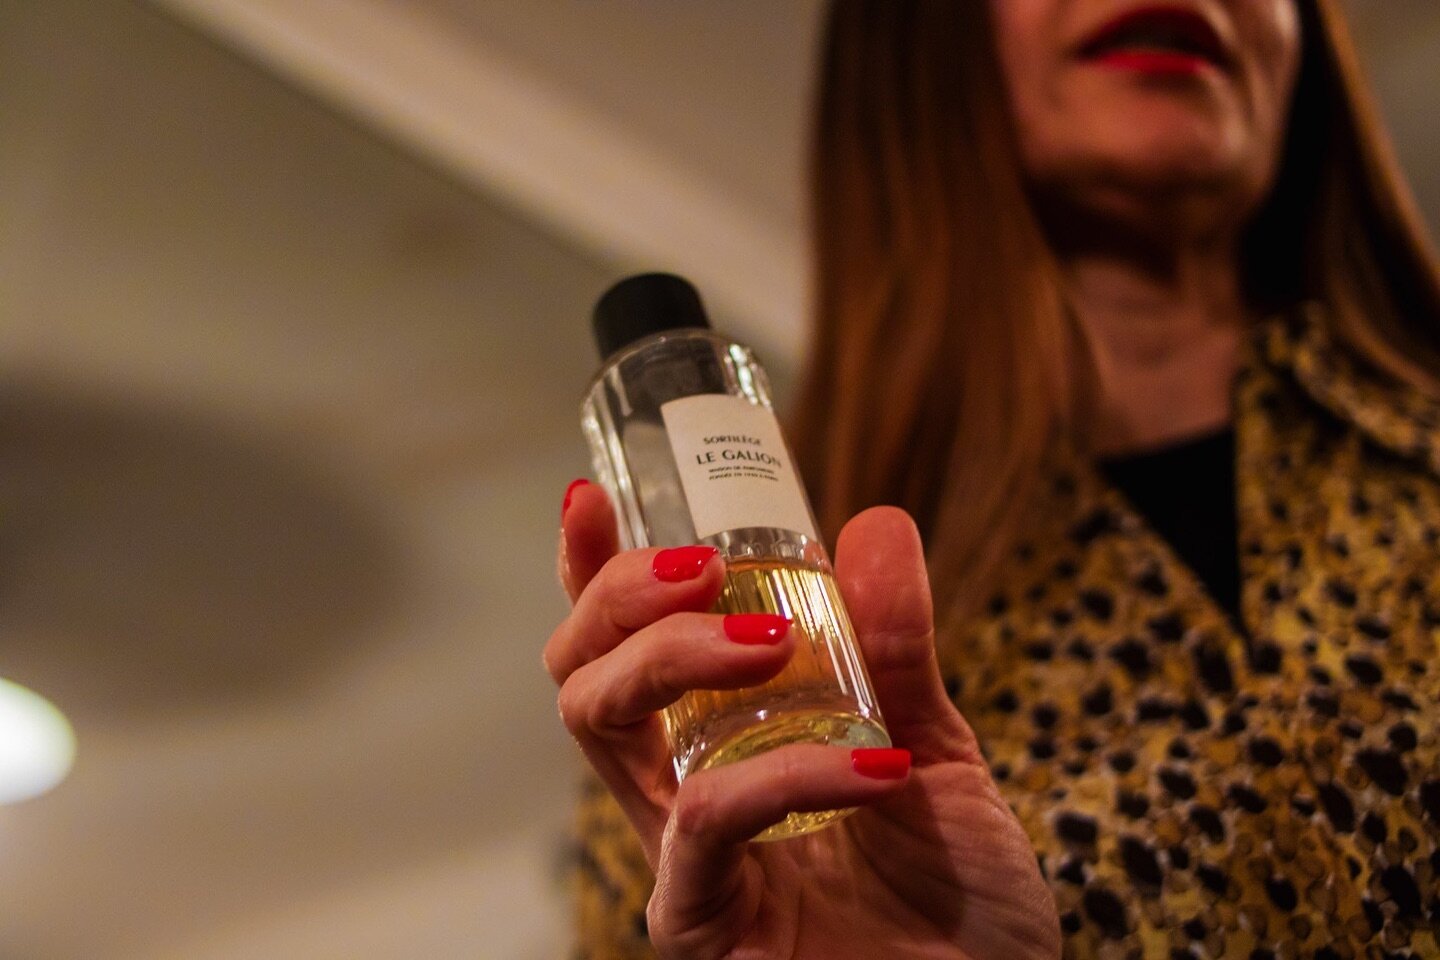 Wow, where did this last month go?

We had the best time capturing content at @shymimosaperfumery&rsquo;s last fragrance workshop. We can&rsquo;t wait for the next one!

#bristolbusiness #perfumery #contentcreationuk #bristolbloggers #ukcontentcreato